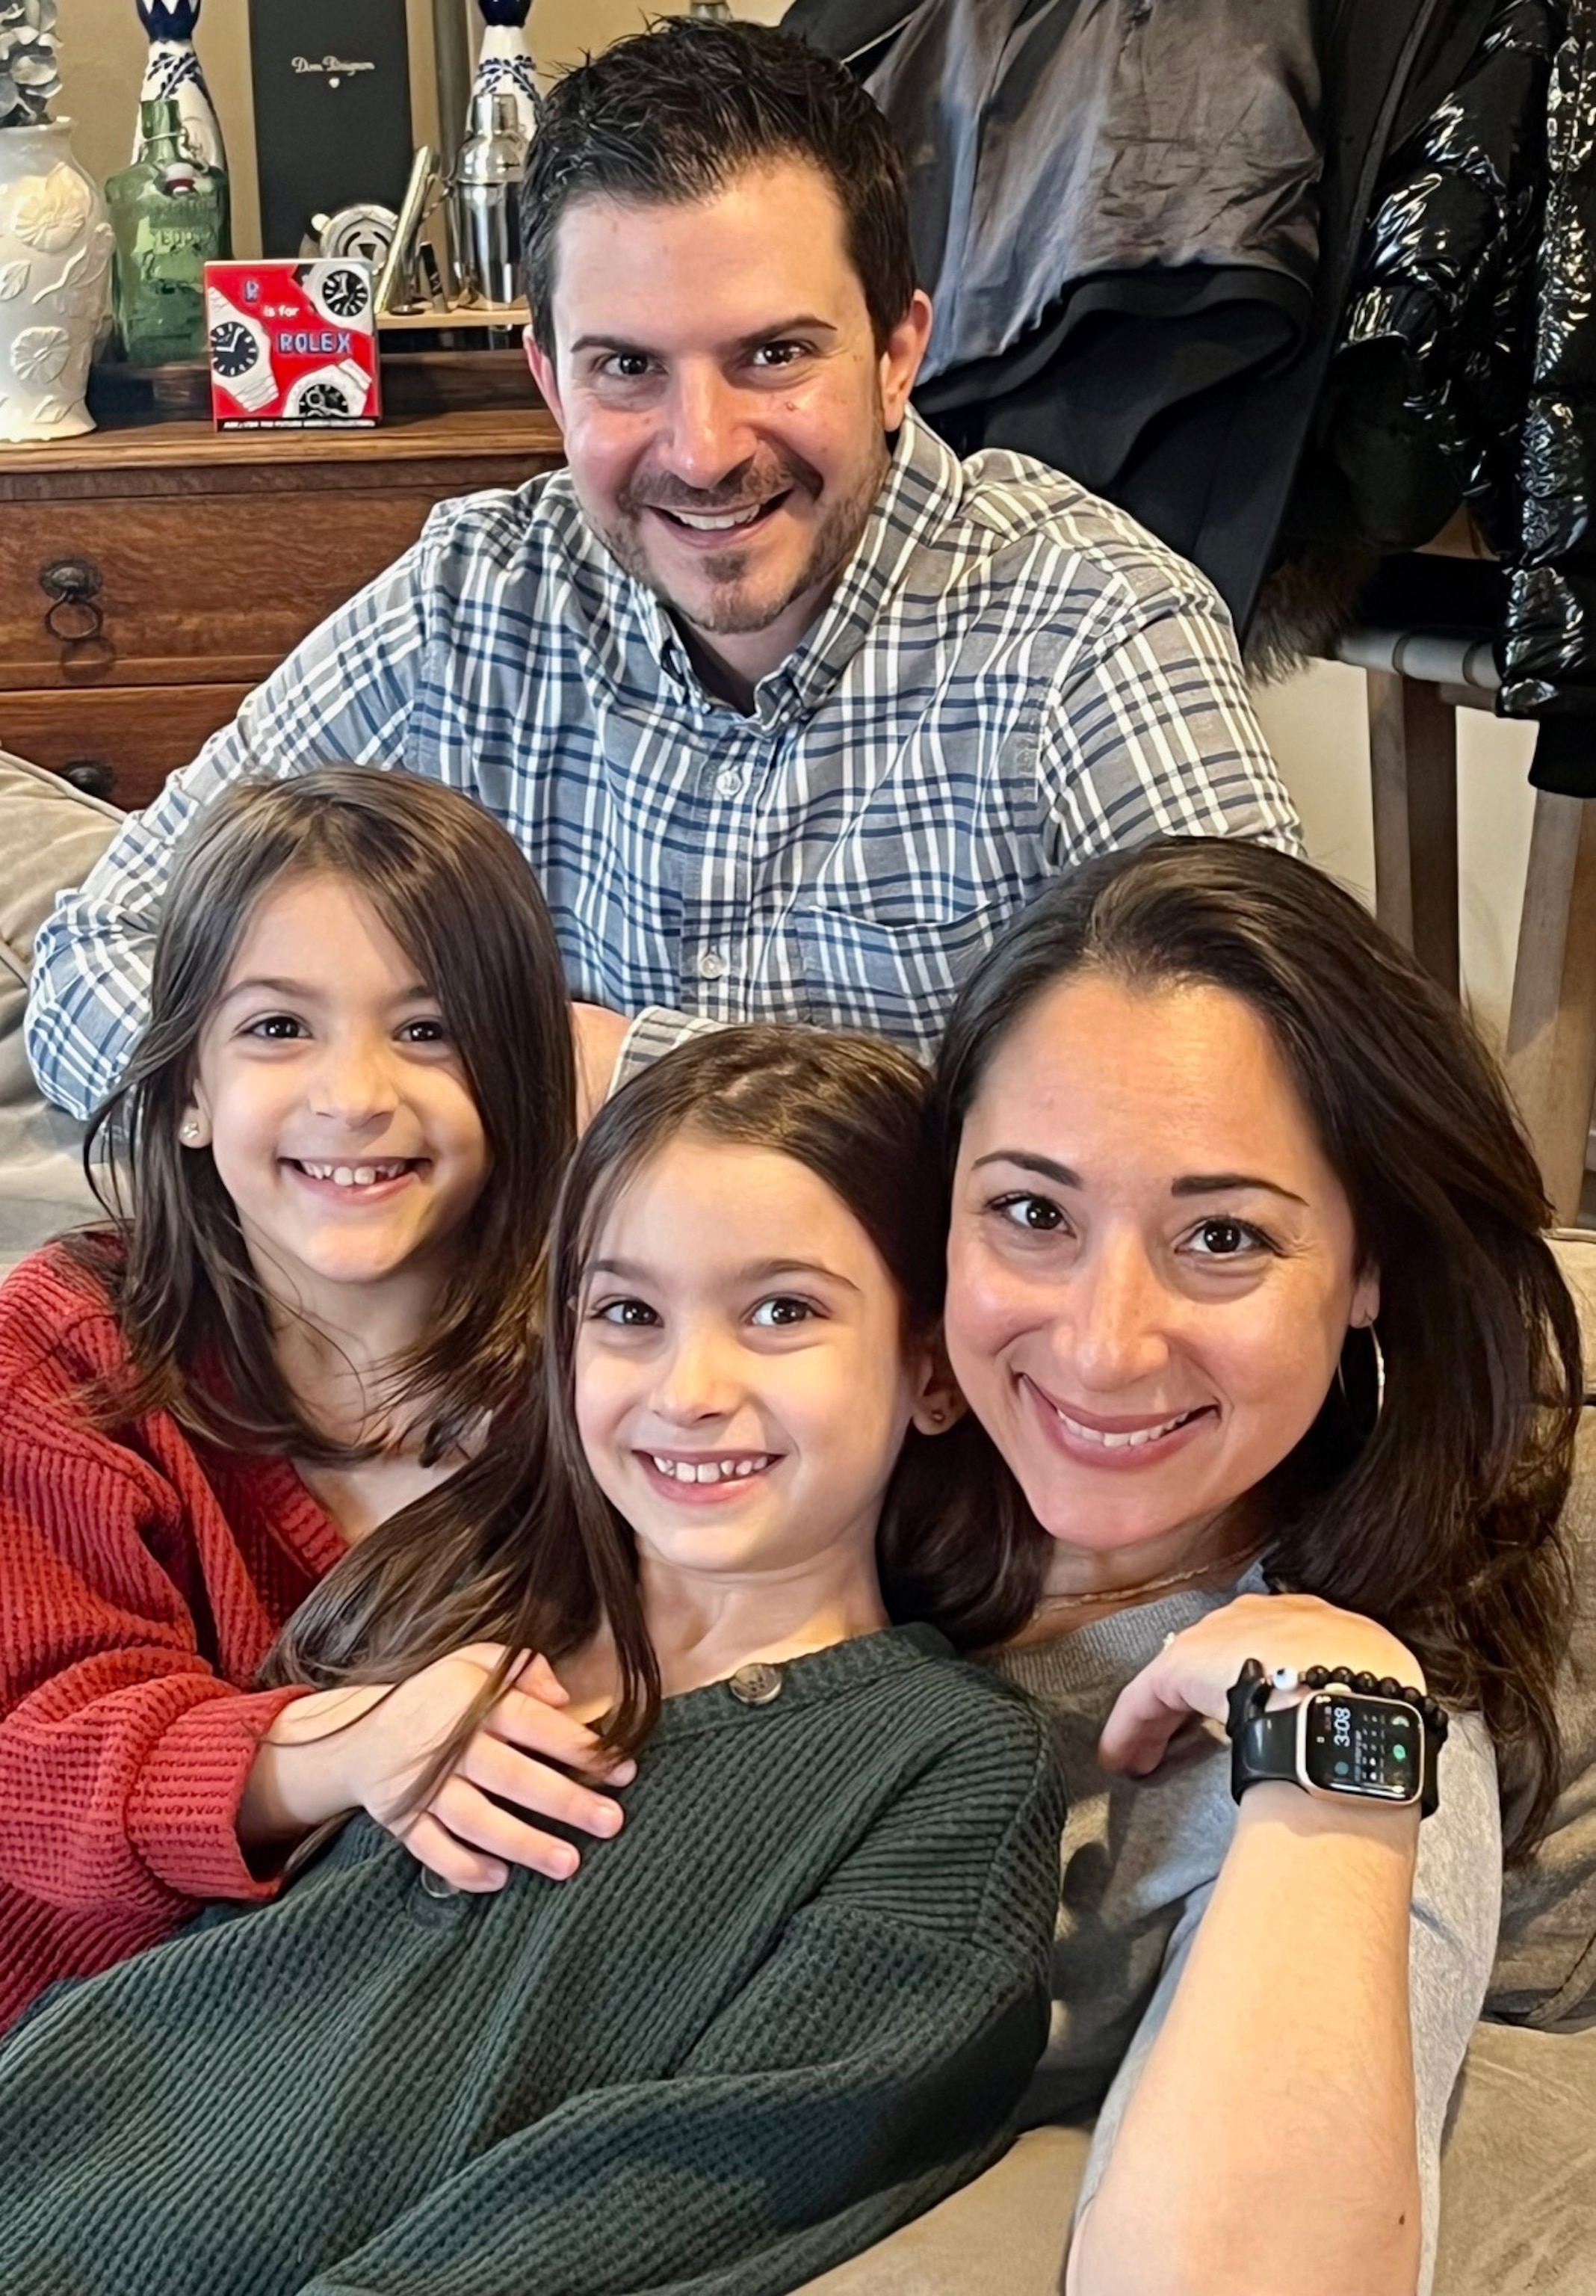 PHOTO: David Speal said he has mostly recovered but still has questions about why some people recover from long COVID and others do not. Speal is pictured with his wife, Jennifer, and twin daughters Natalie and Olivia.